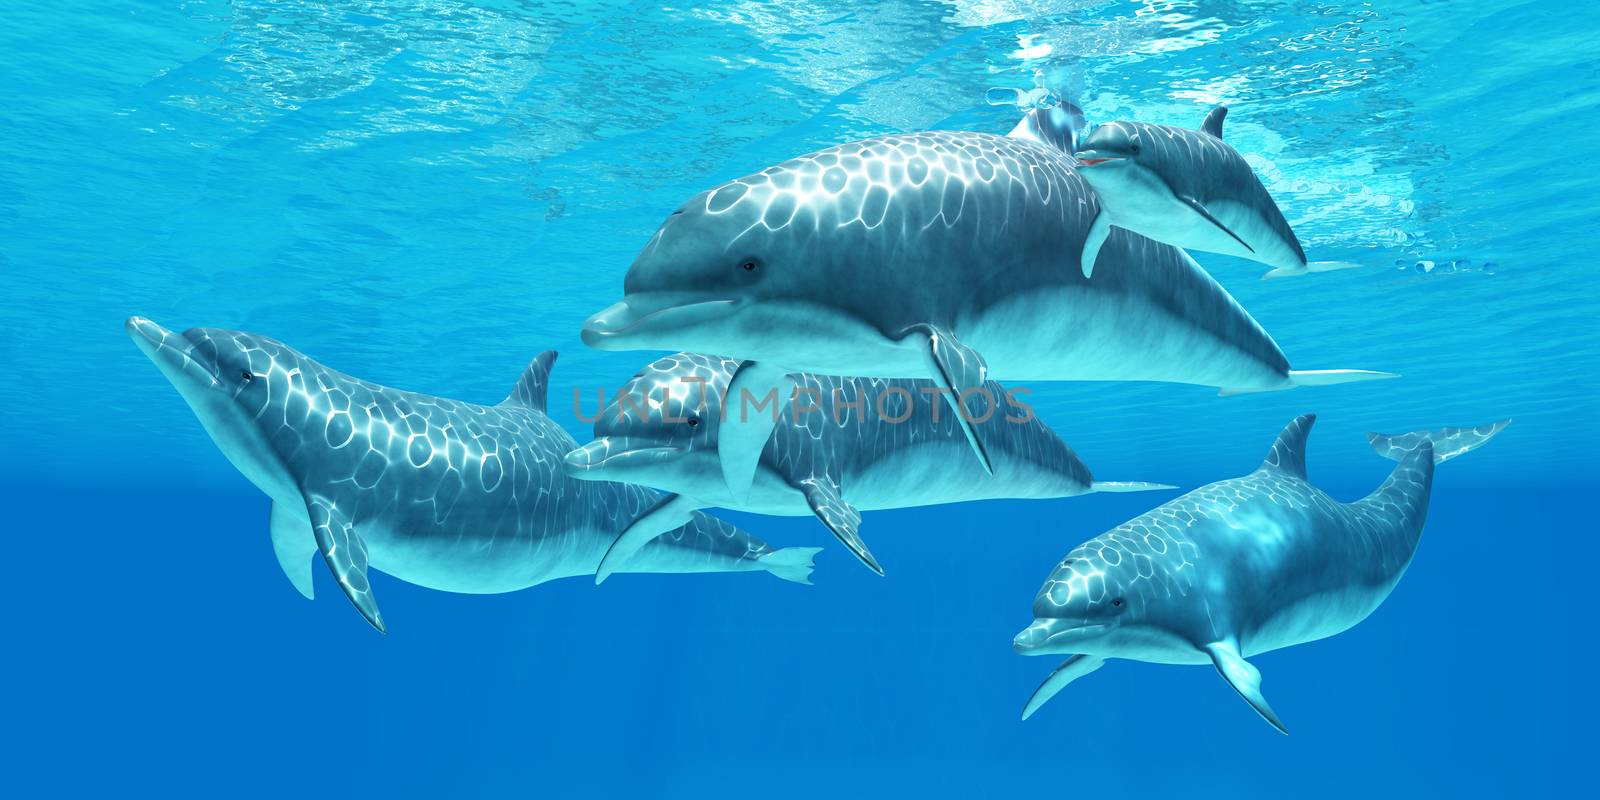 Bottlenose dolphins live in a group called pods and forage the ocean for fish prey.